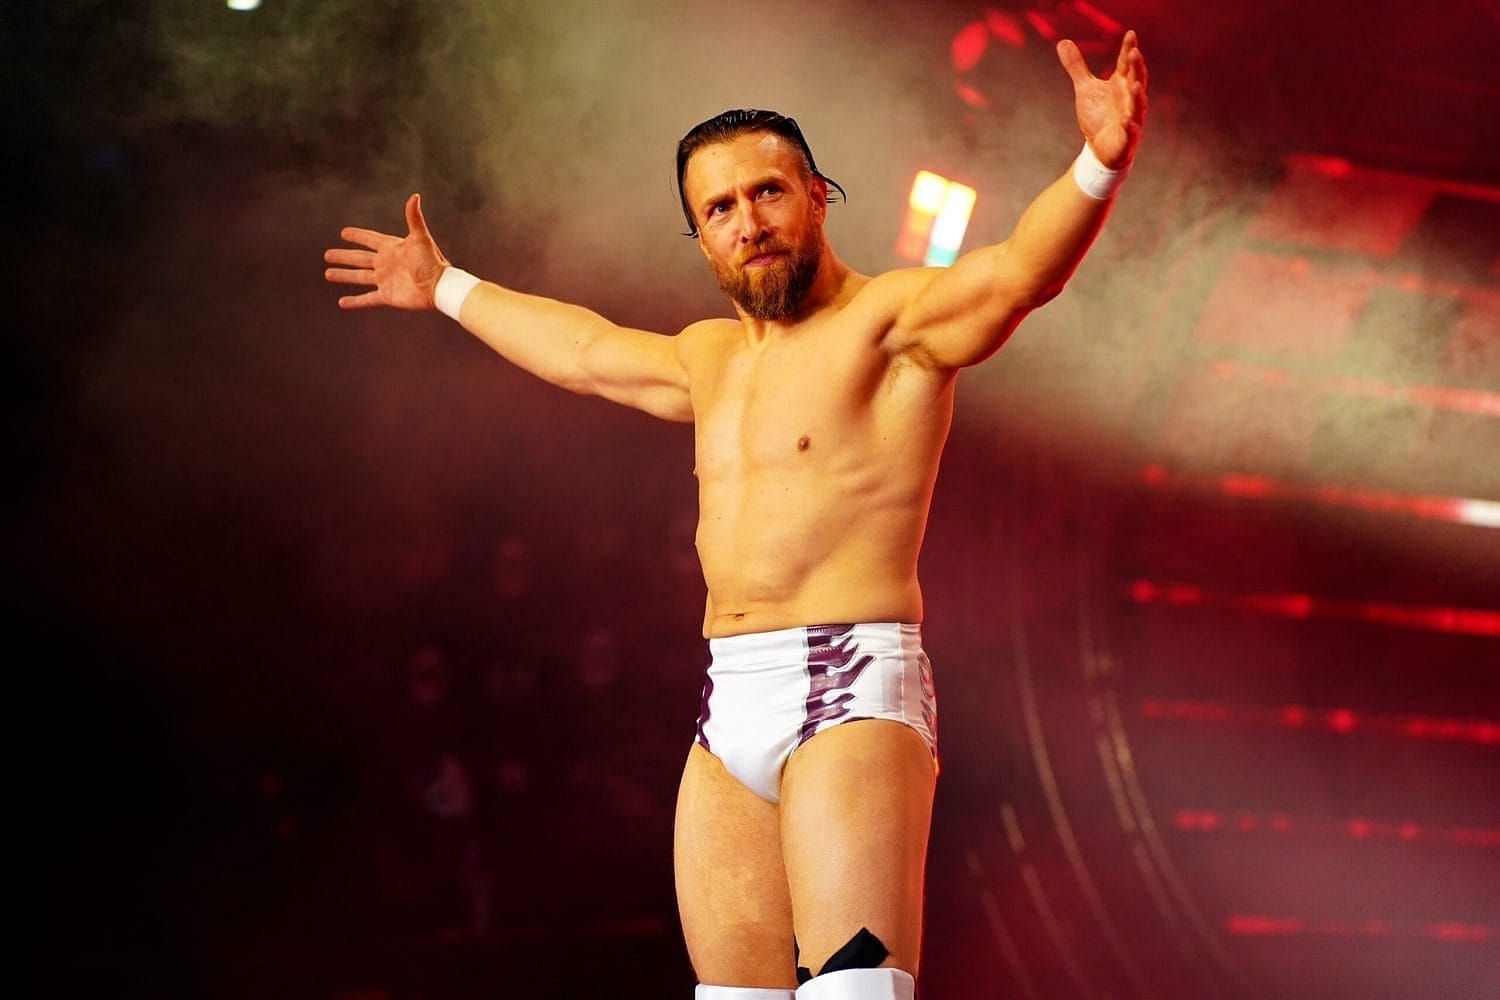 Bryan Danielson will face Jake Hager on the upcoming episode of AEW Dynamite